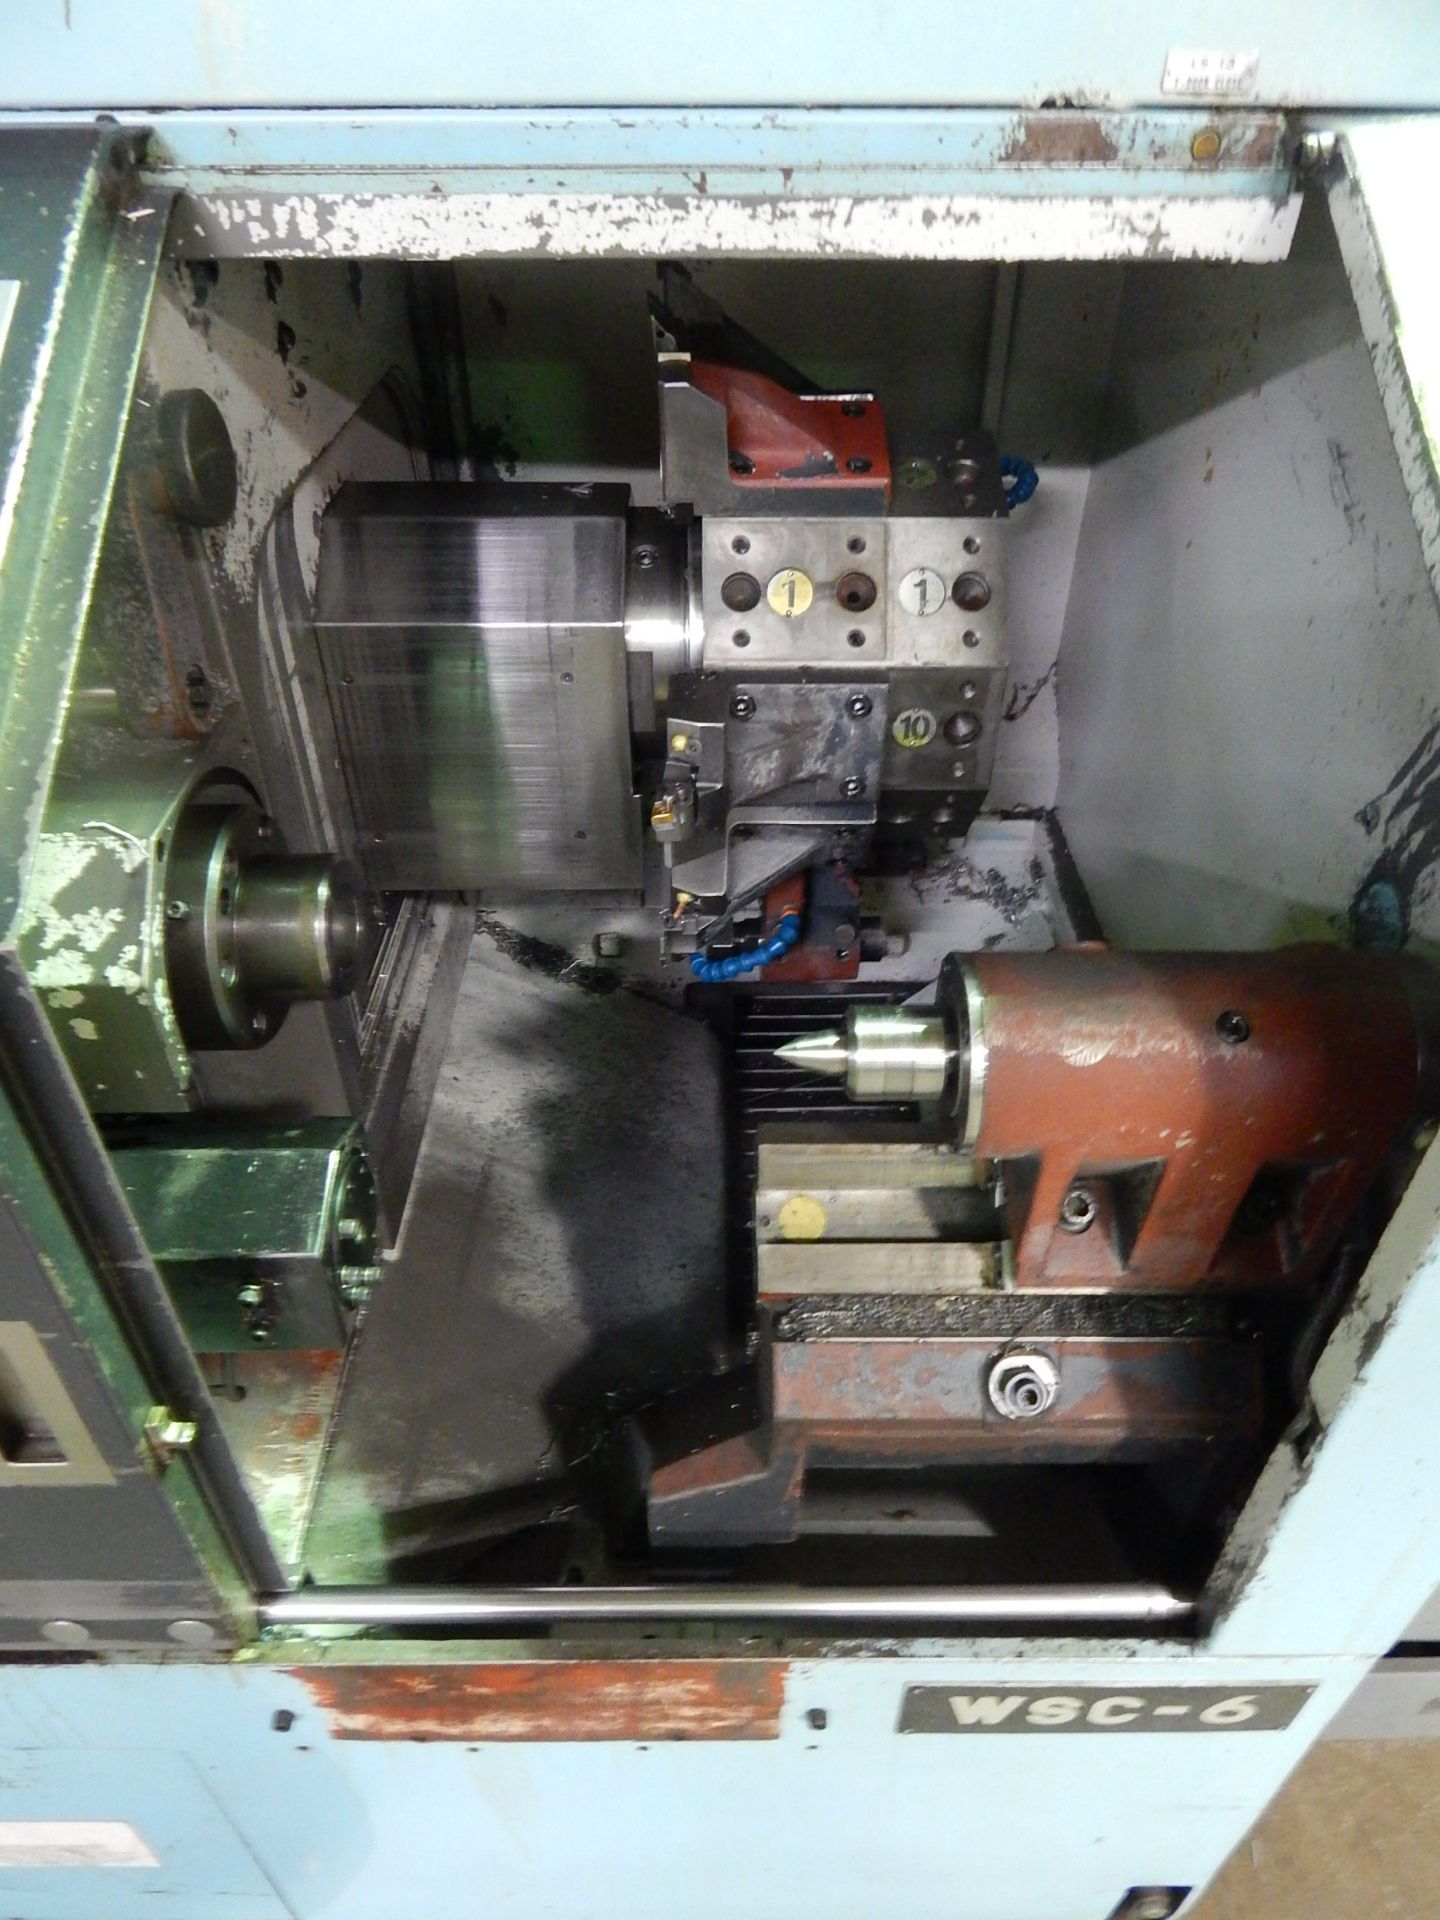 Warner & Swasey Model WSC-6 CNC Turning Center, s/n 1488326, Fanuc 0-T CNC Control, 1.85 In. - Image 4 of 8